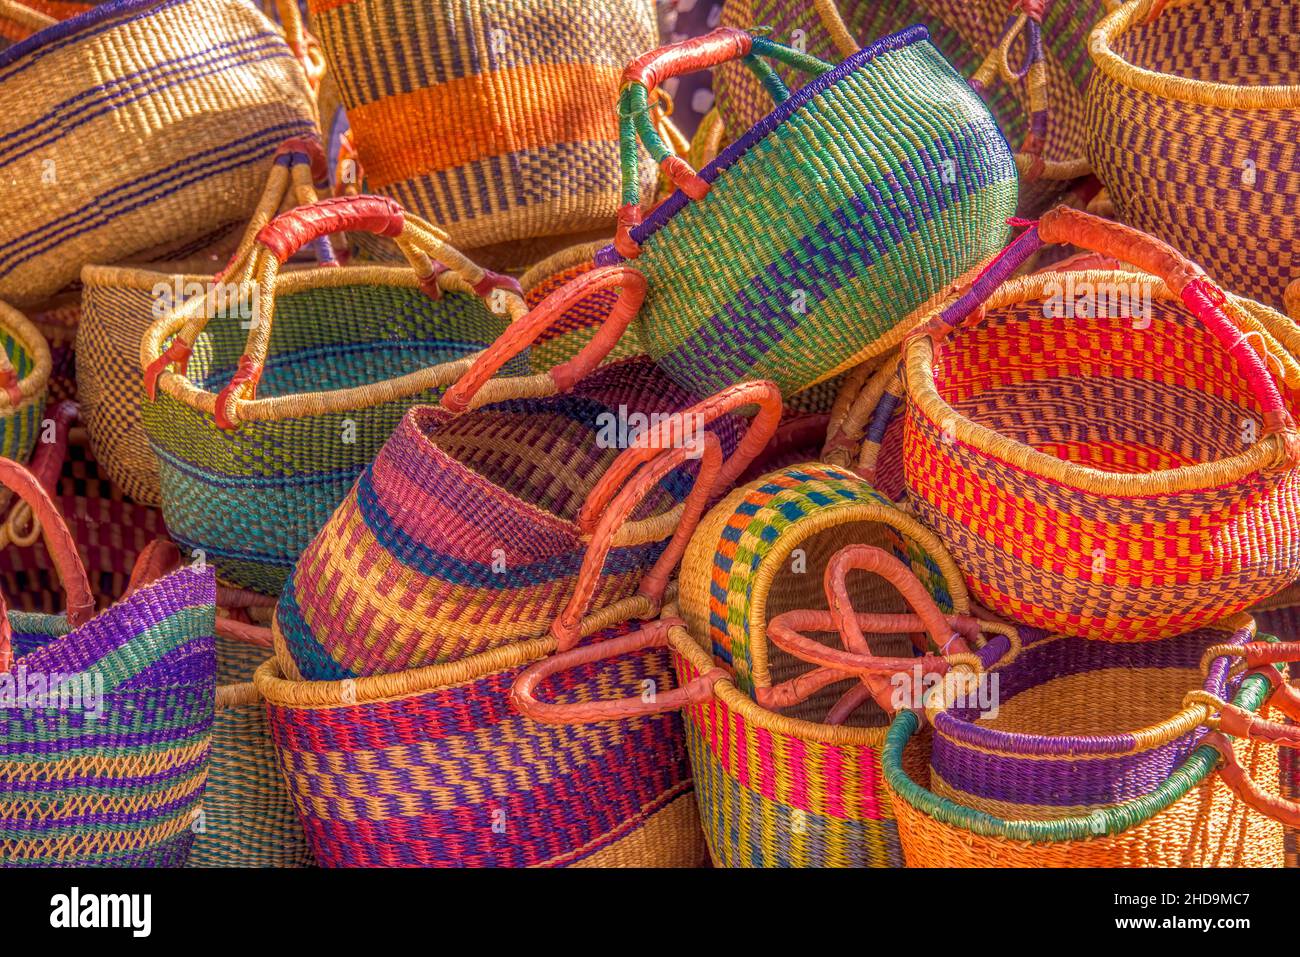 Colorful Native American Baskets in Taos Street Market Stock Photo